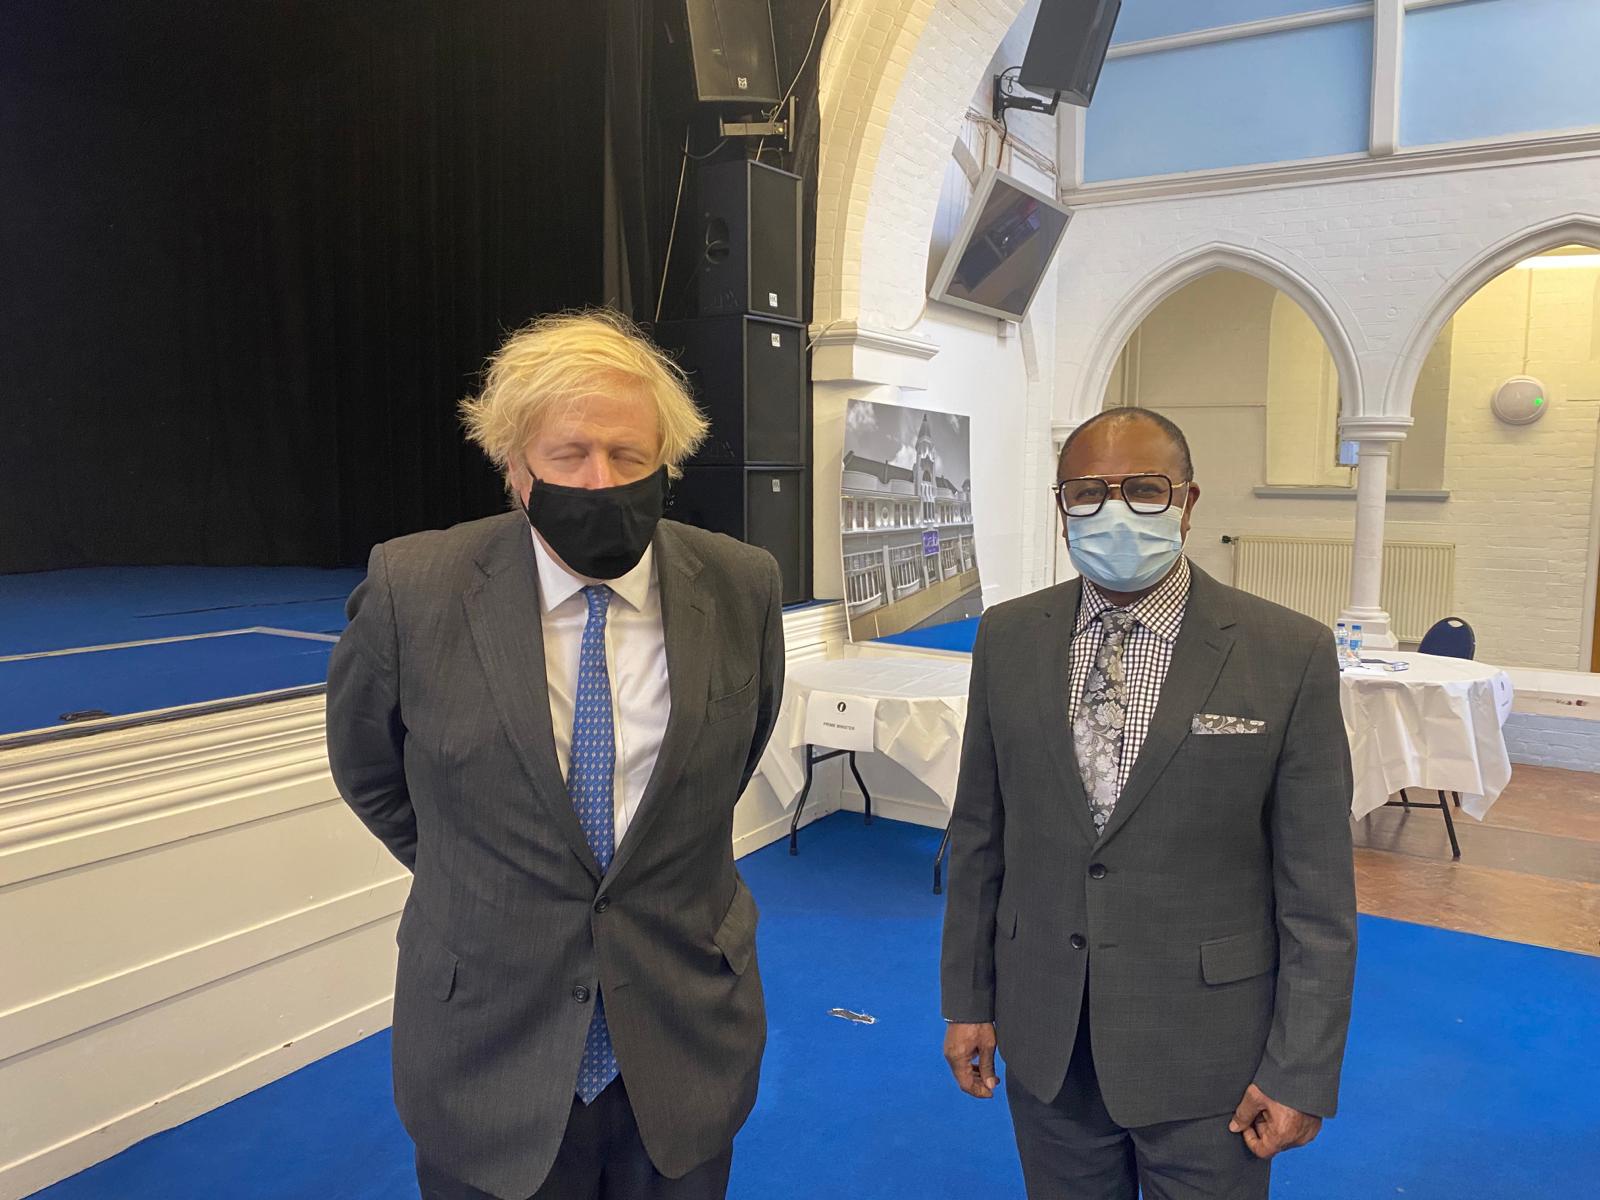 Slcss CEO with the Prime minister. Boris Johnson